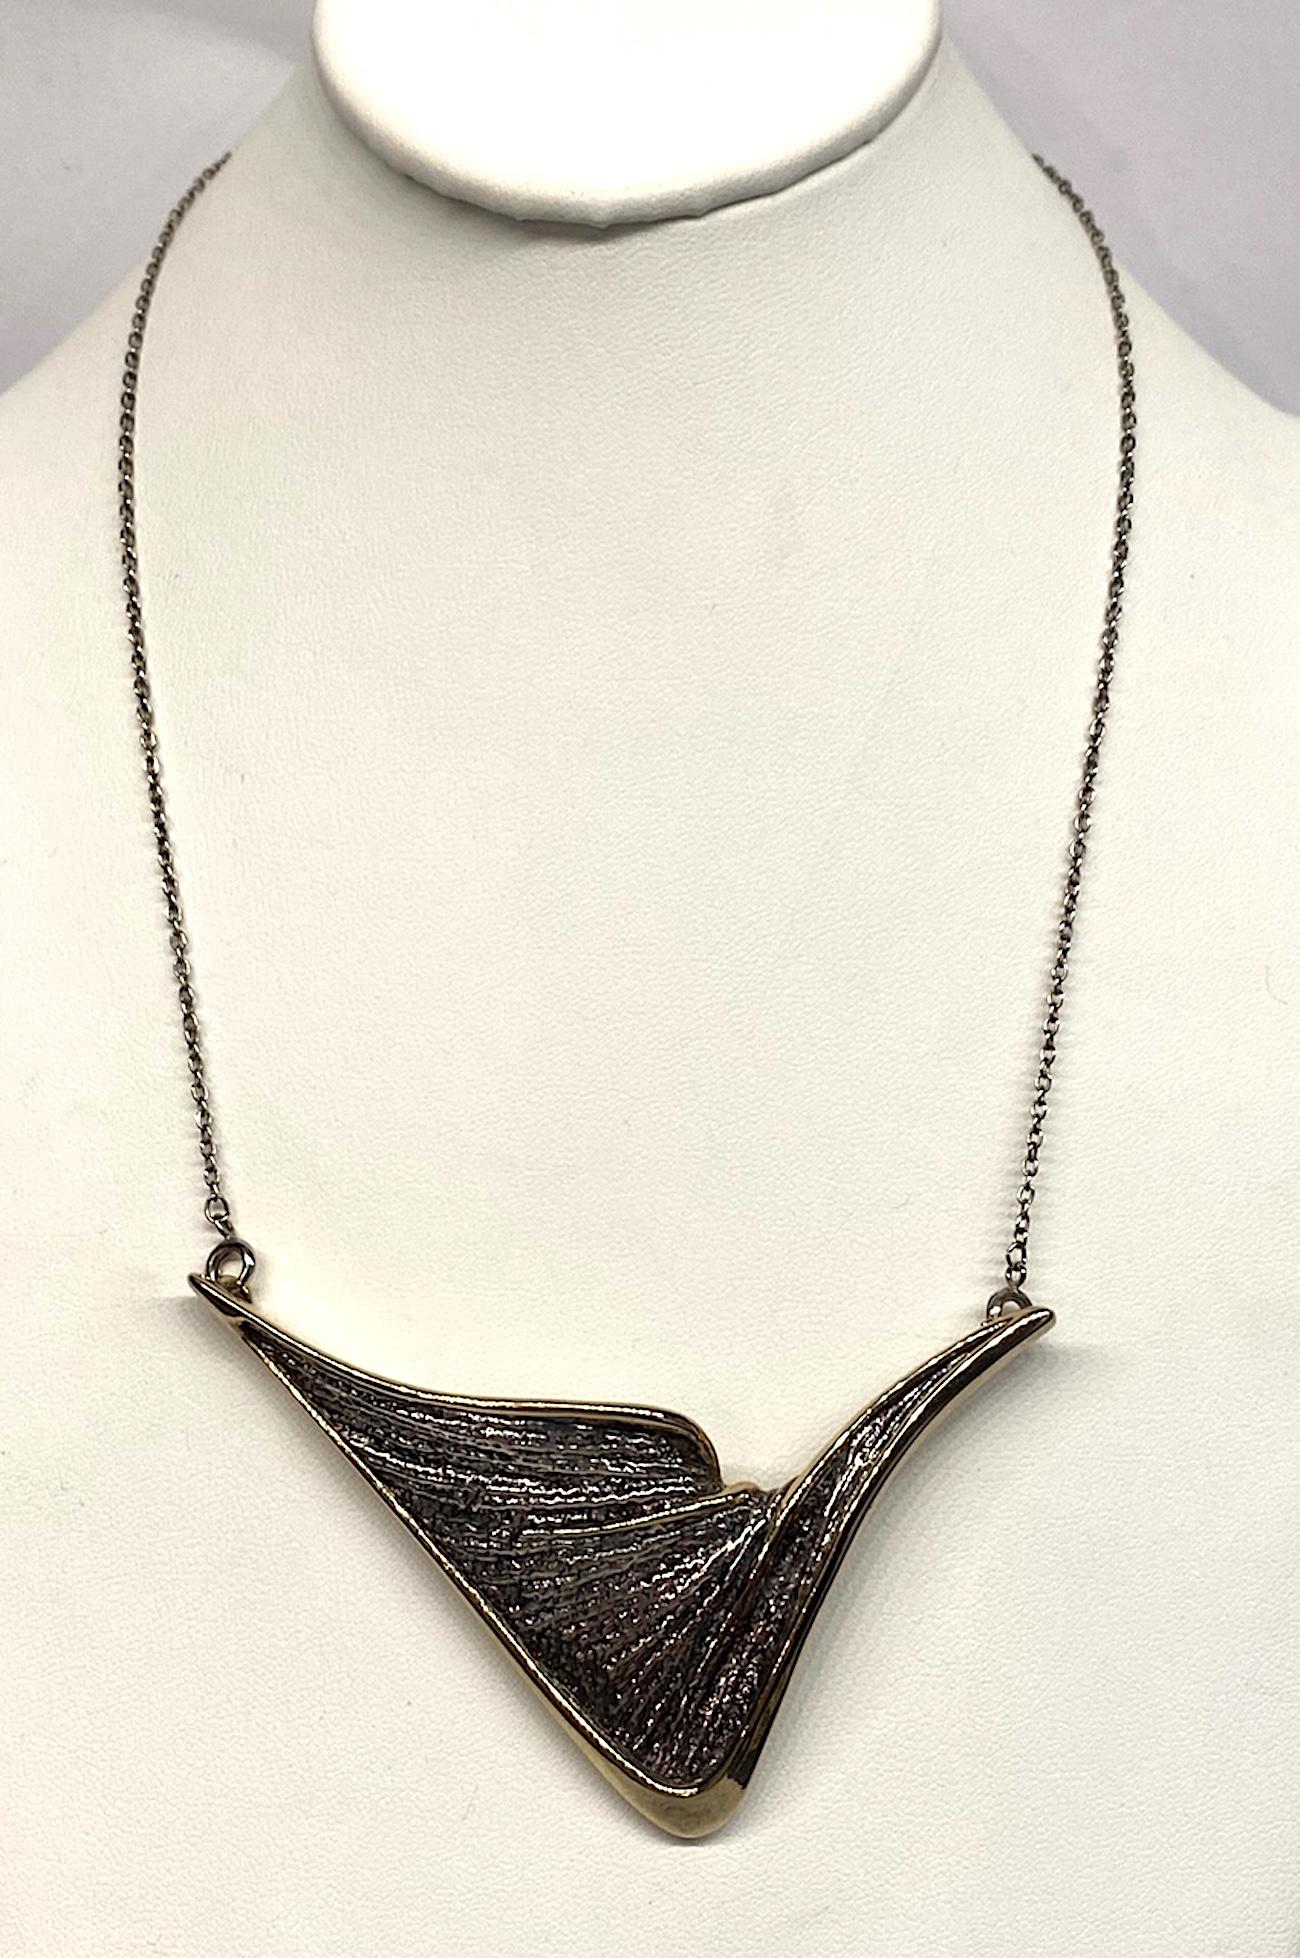 A wonderful abstract patinated and gilt sterling silver pendant necklace. The sweeping V form pendant is beautifully cast in wax first and patinated in the grooves. It is not heavy as pendant is hollow except for was. The edges are gold plated. The